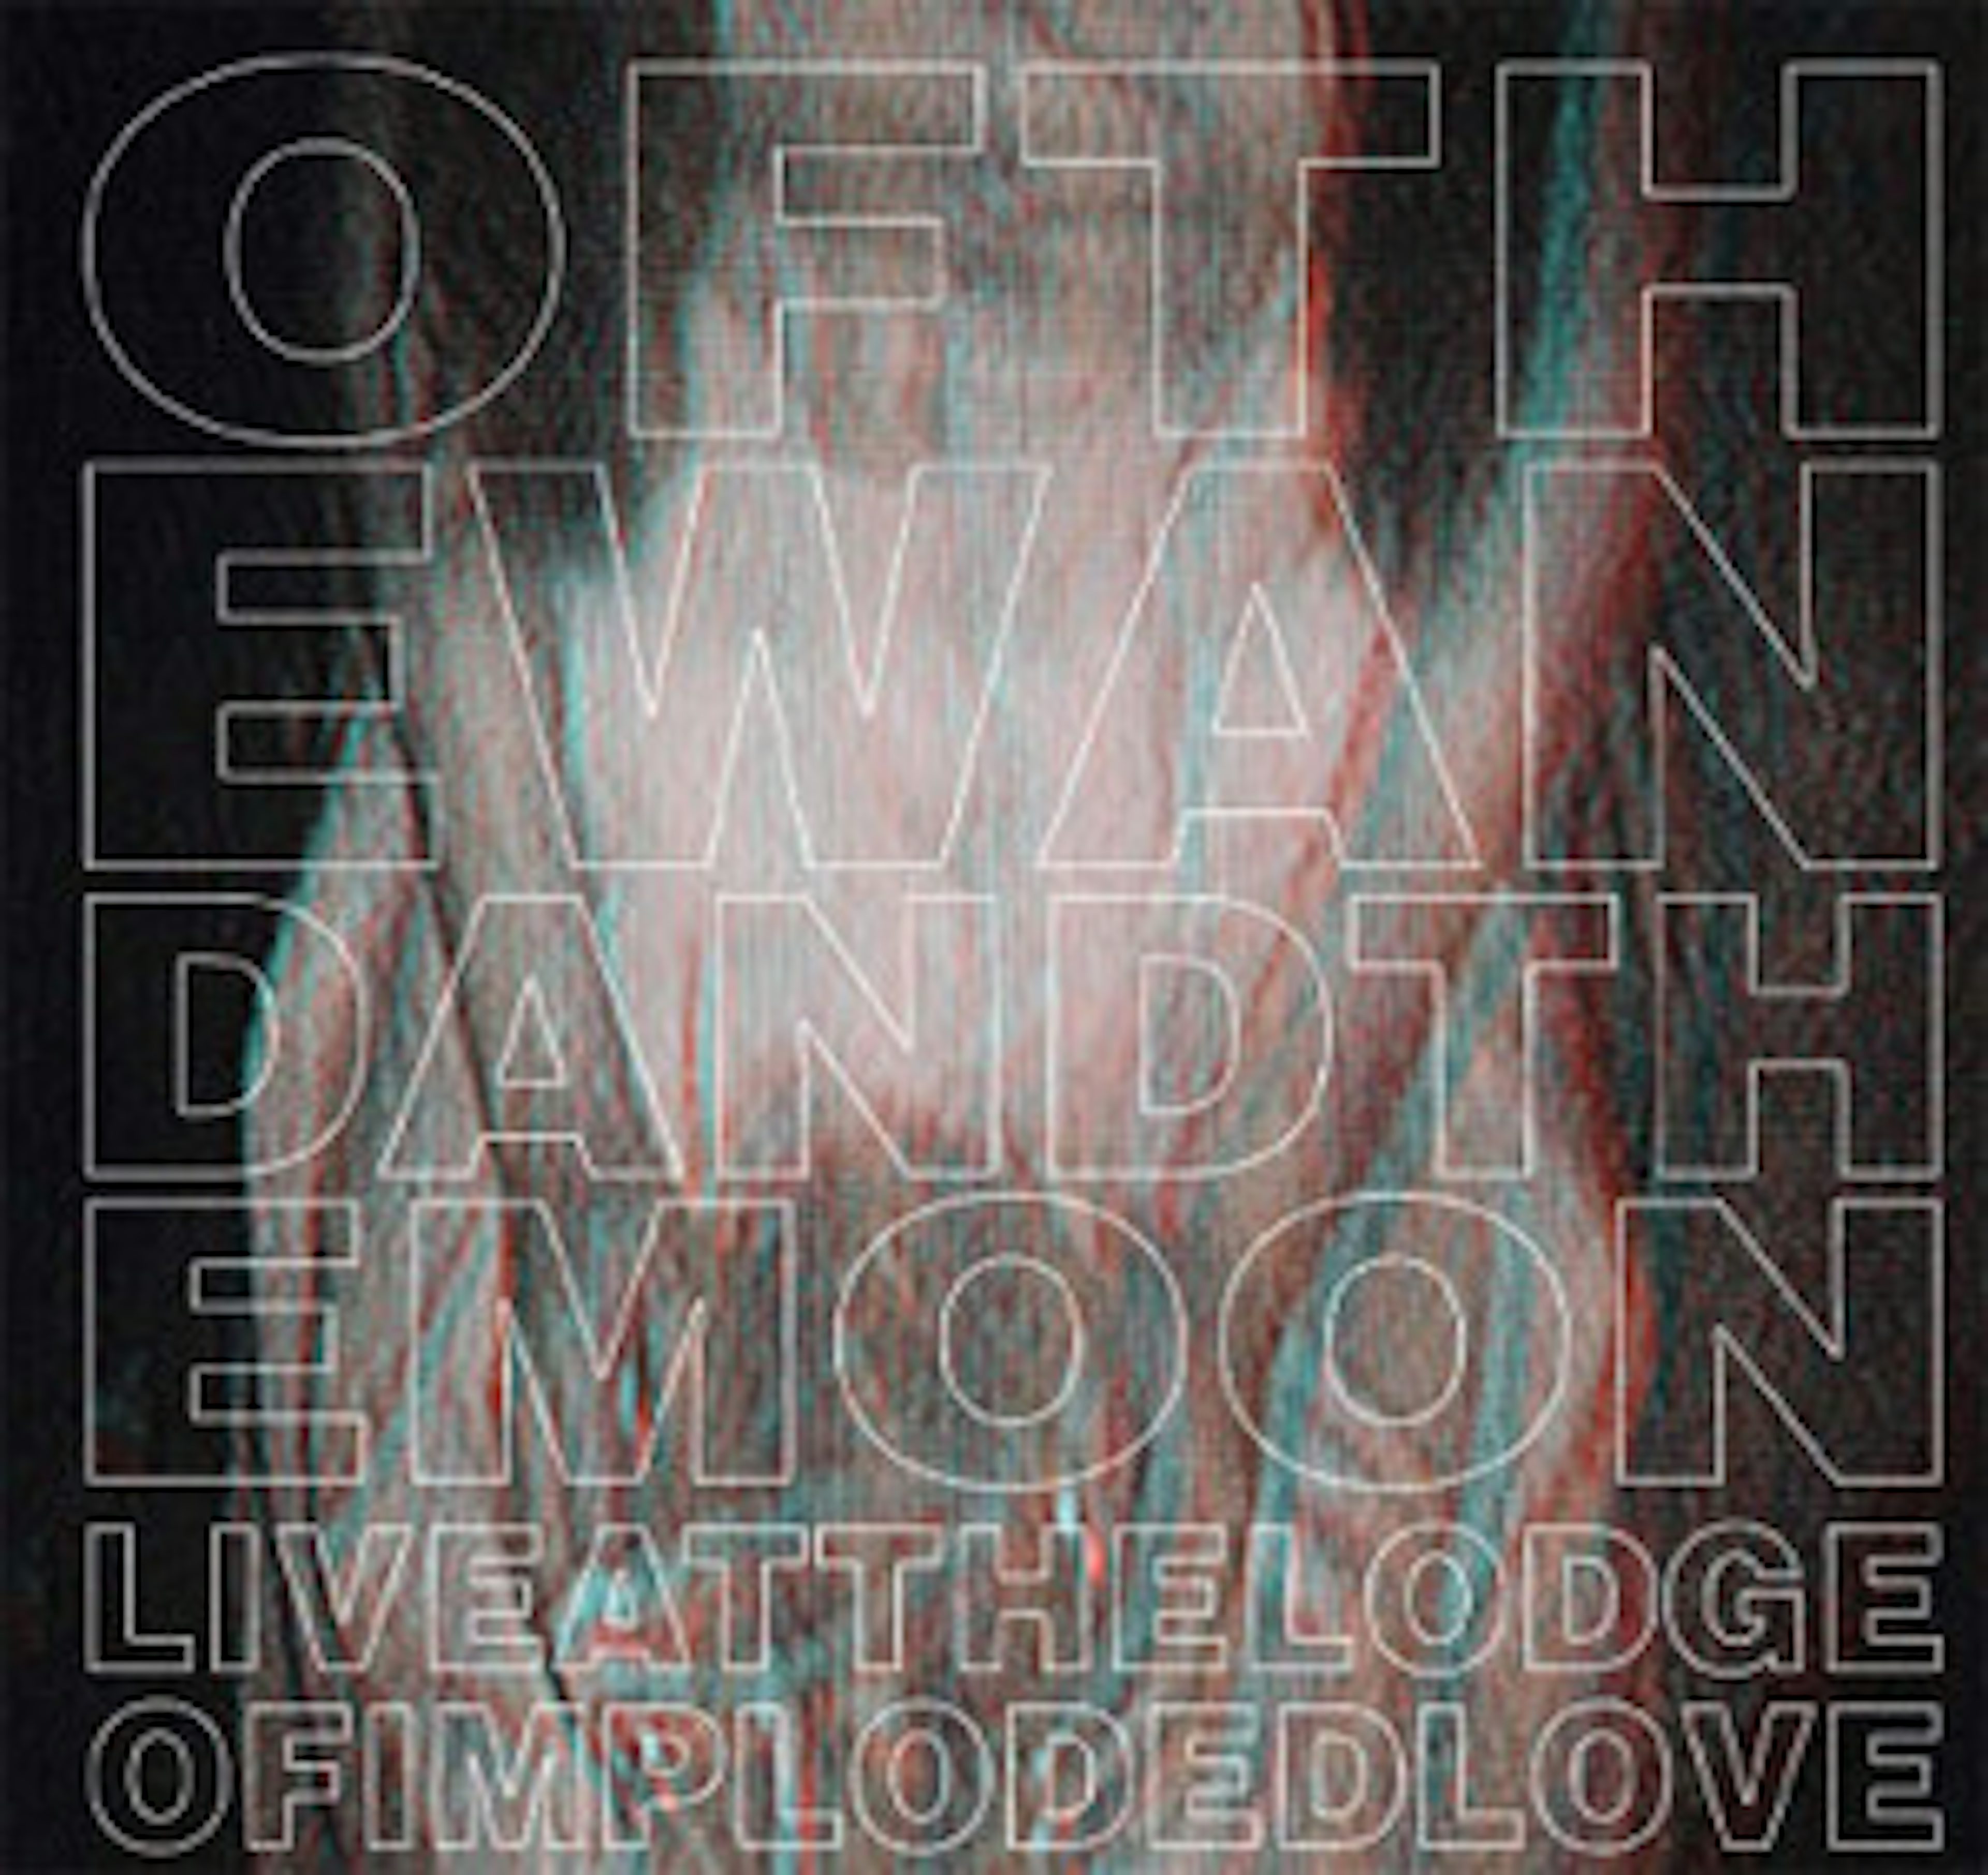 Of The Wand The LIVE AT THE LODGE OF IMPLODED LOVE Vinyl